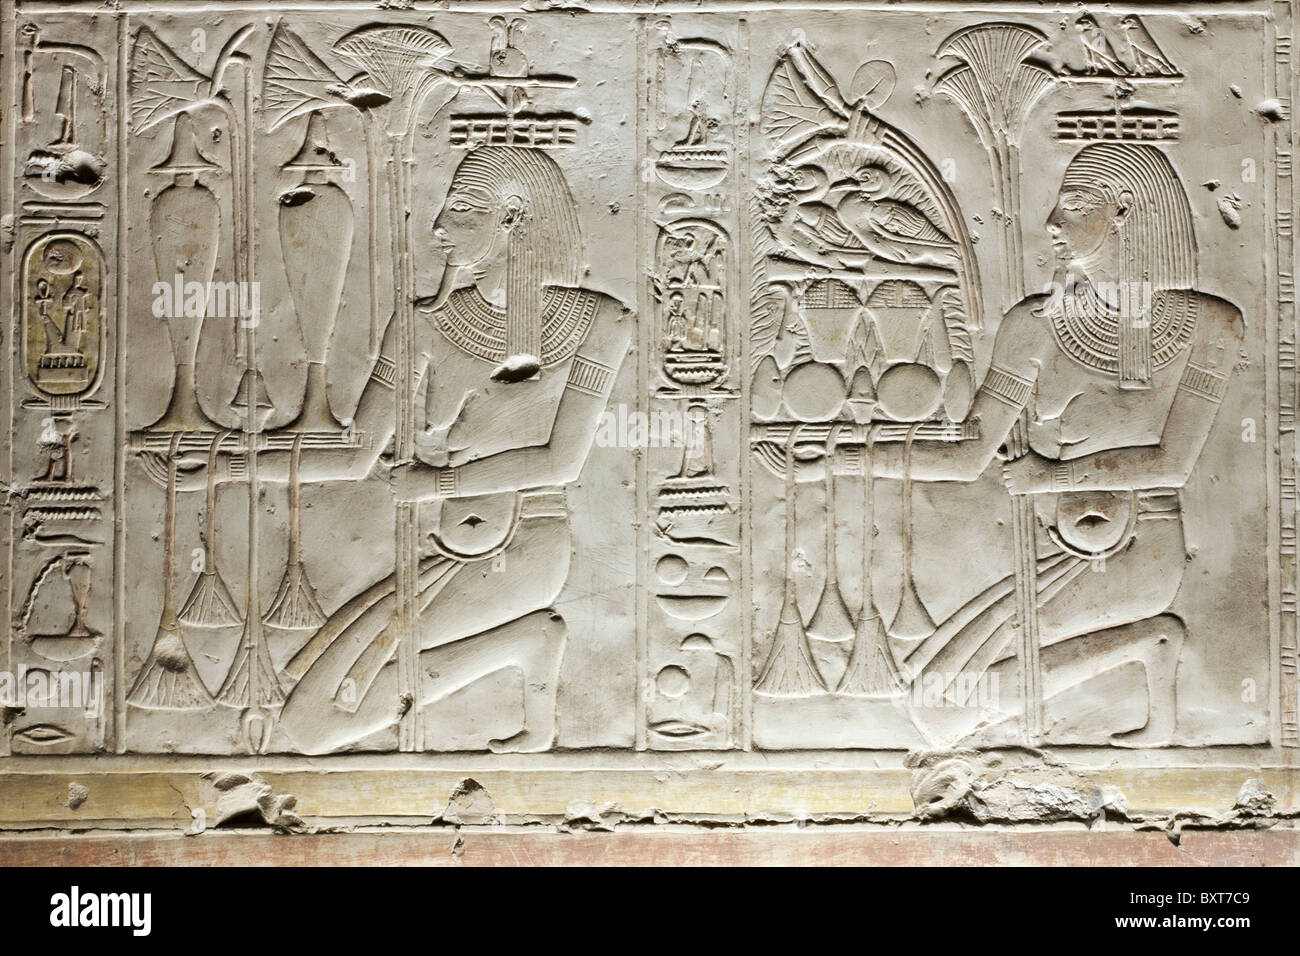 Relief work from sanctuary within the Temple of Seti I at Abydos, ancient Abdju, Nile Valley Egypt Stock Photo